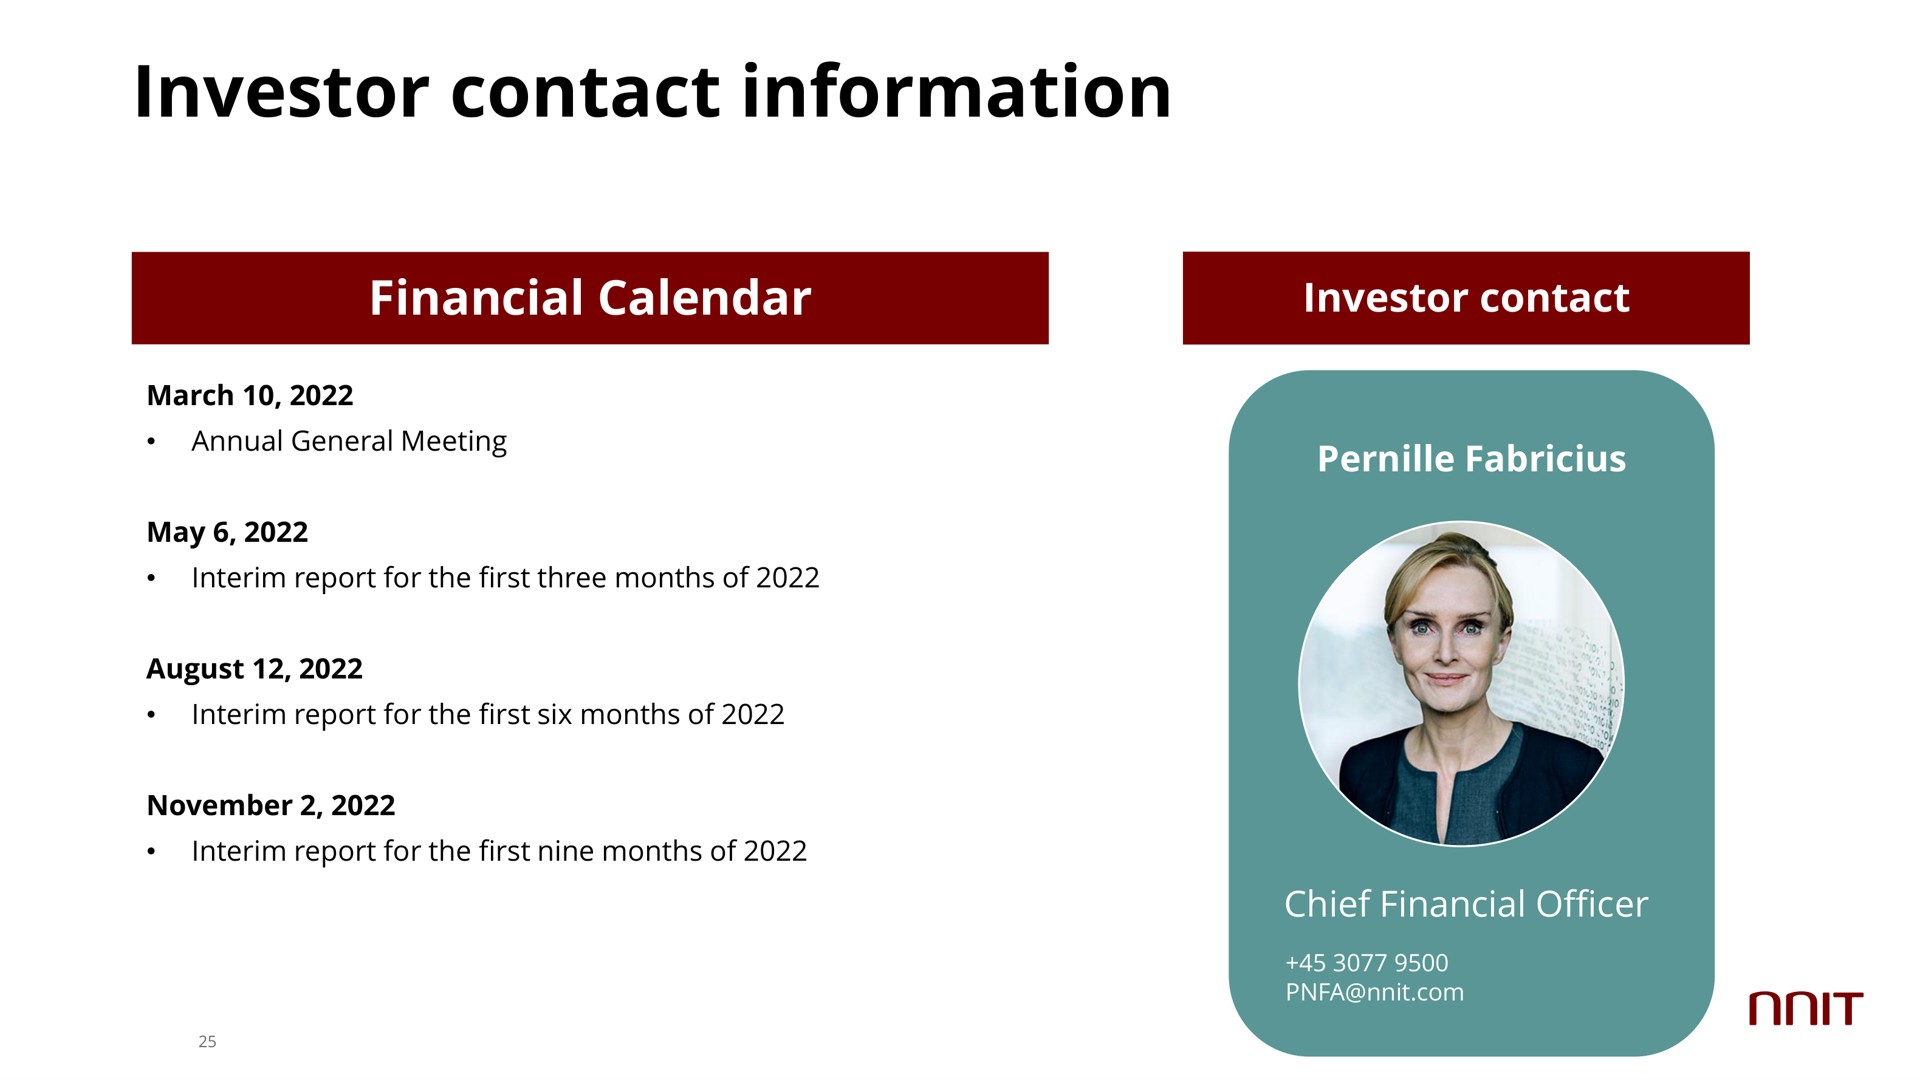 investor contact information | NNIT